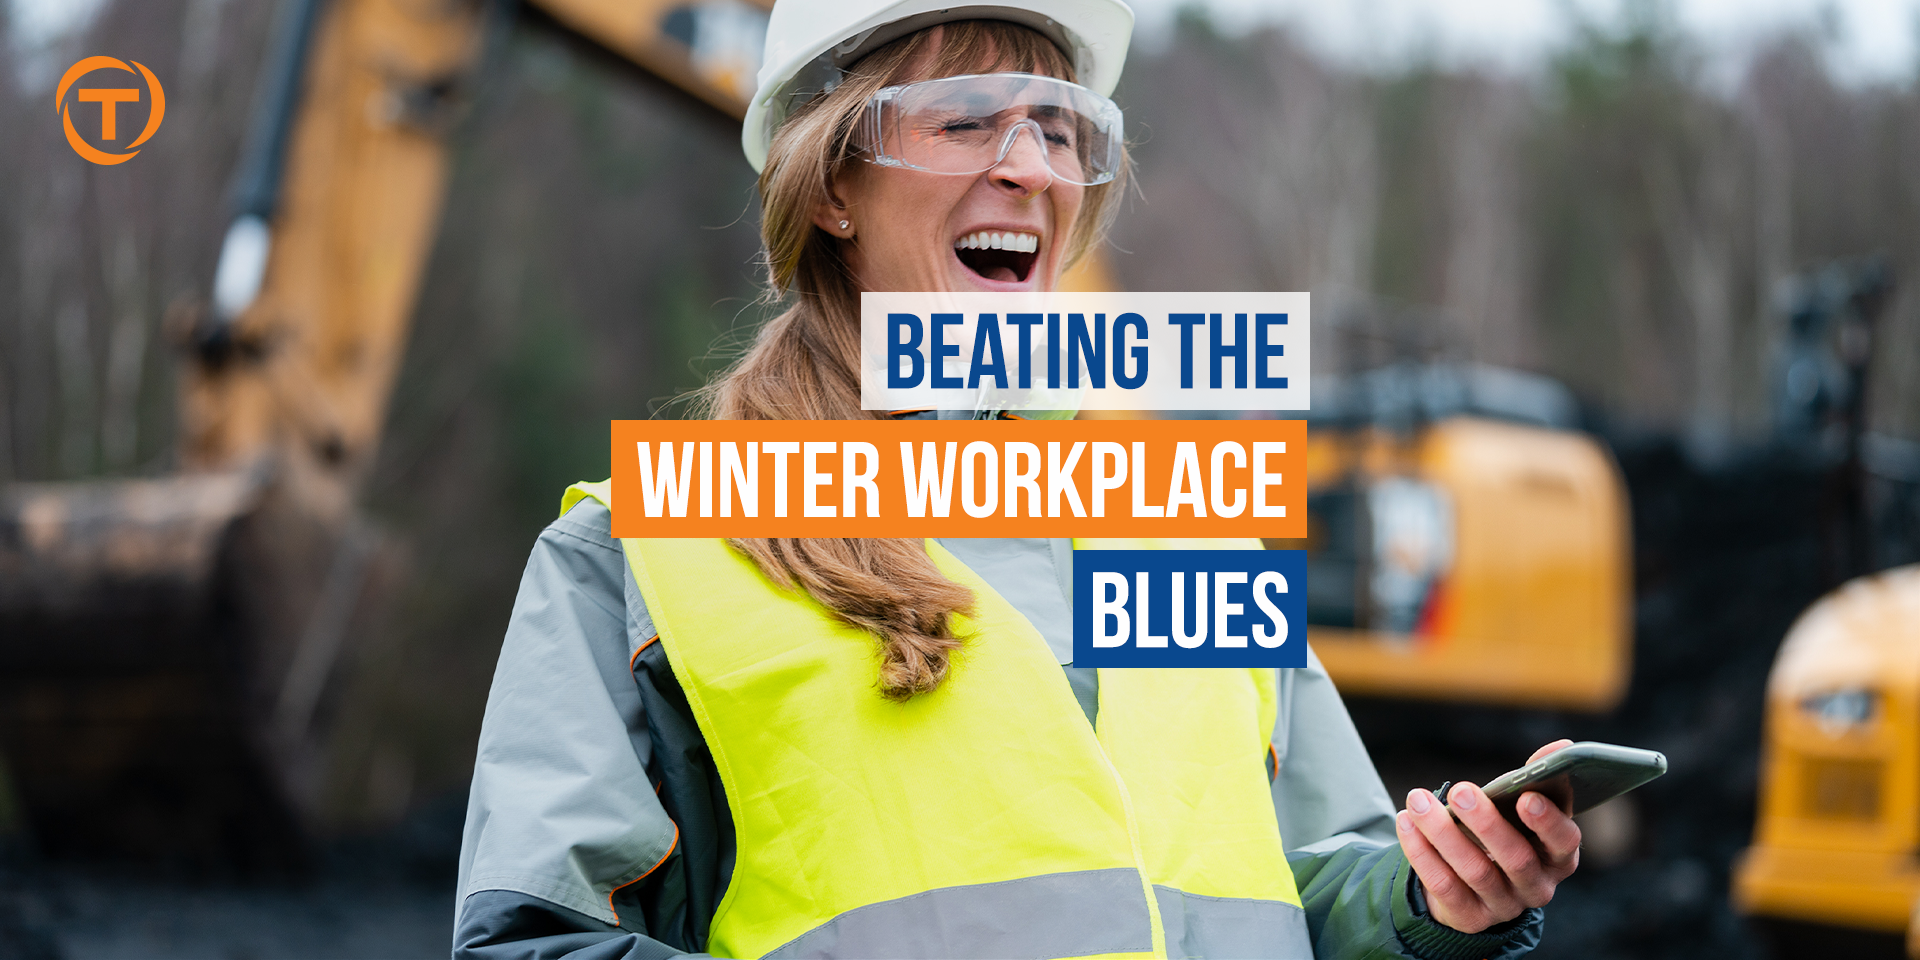 Blog [06 June] Beating The Winter Workplace Blues